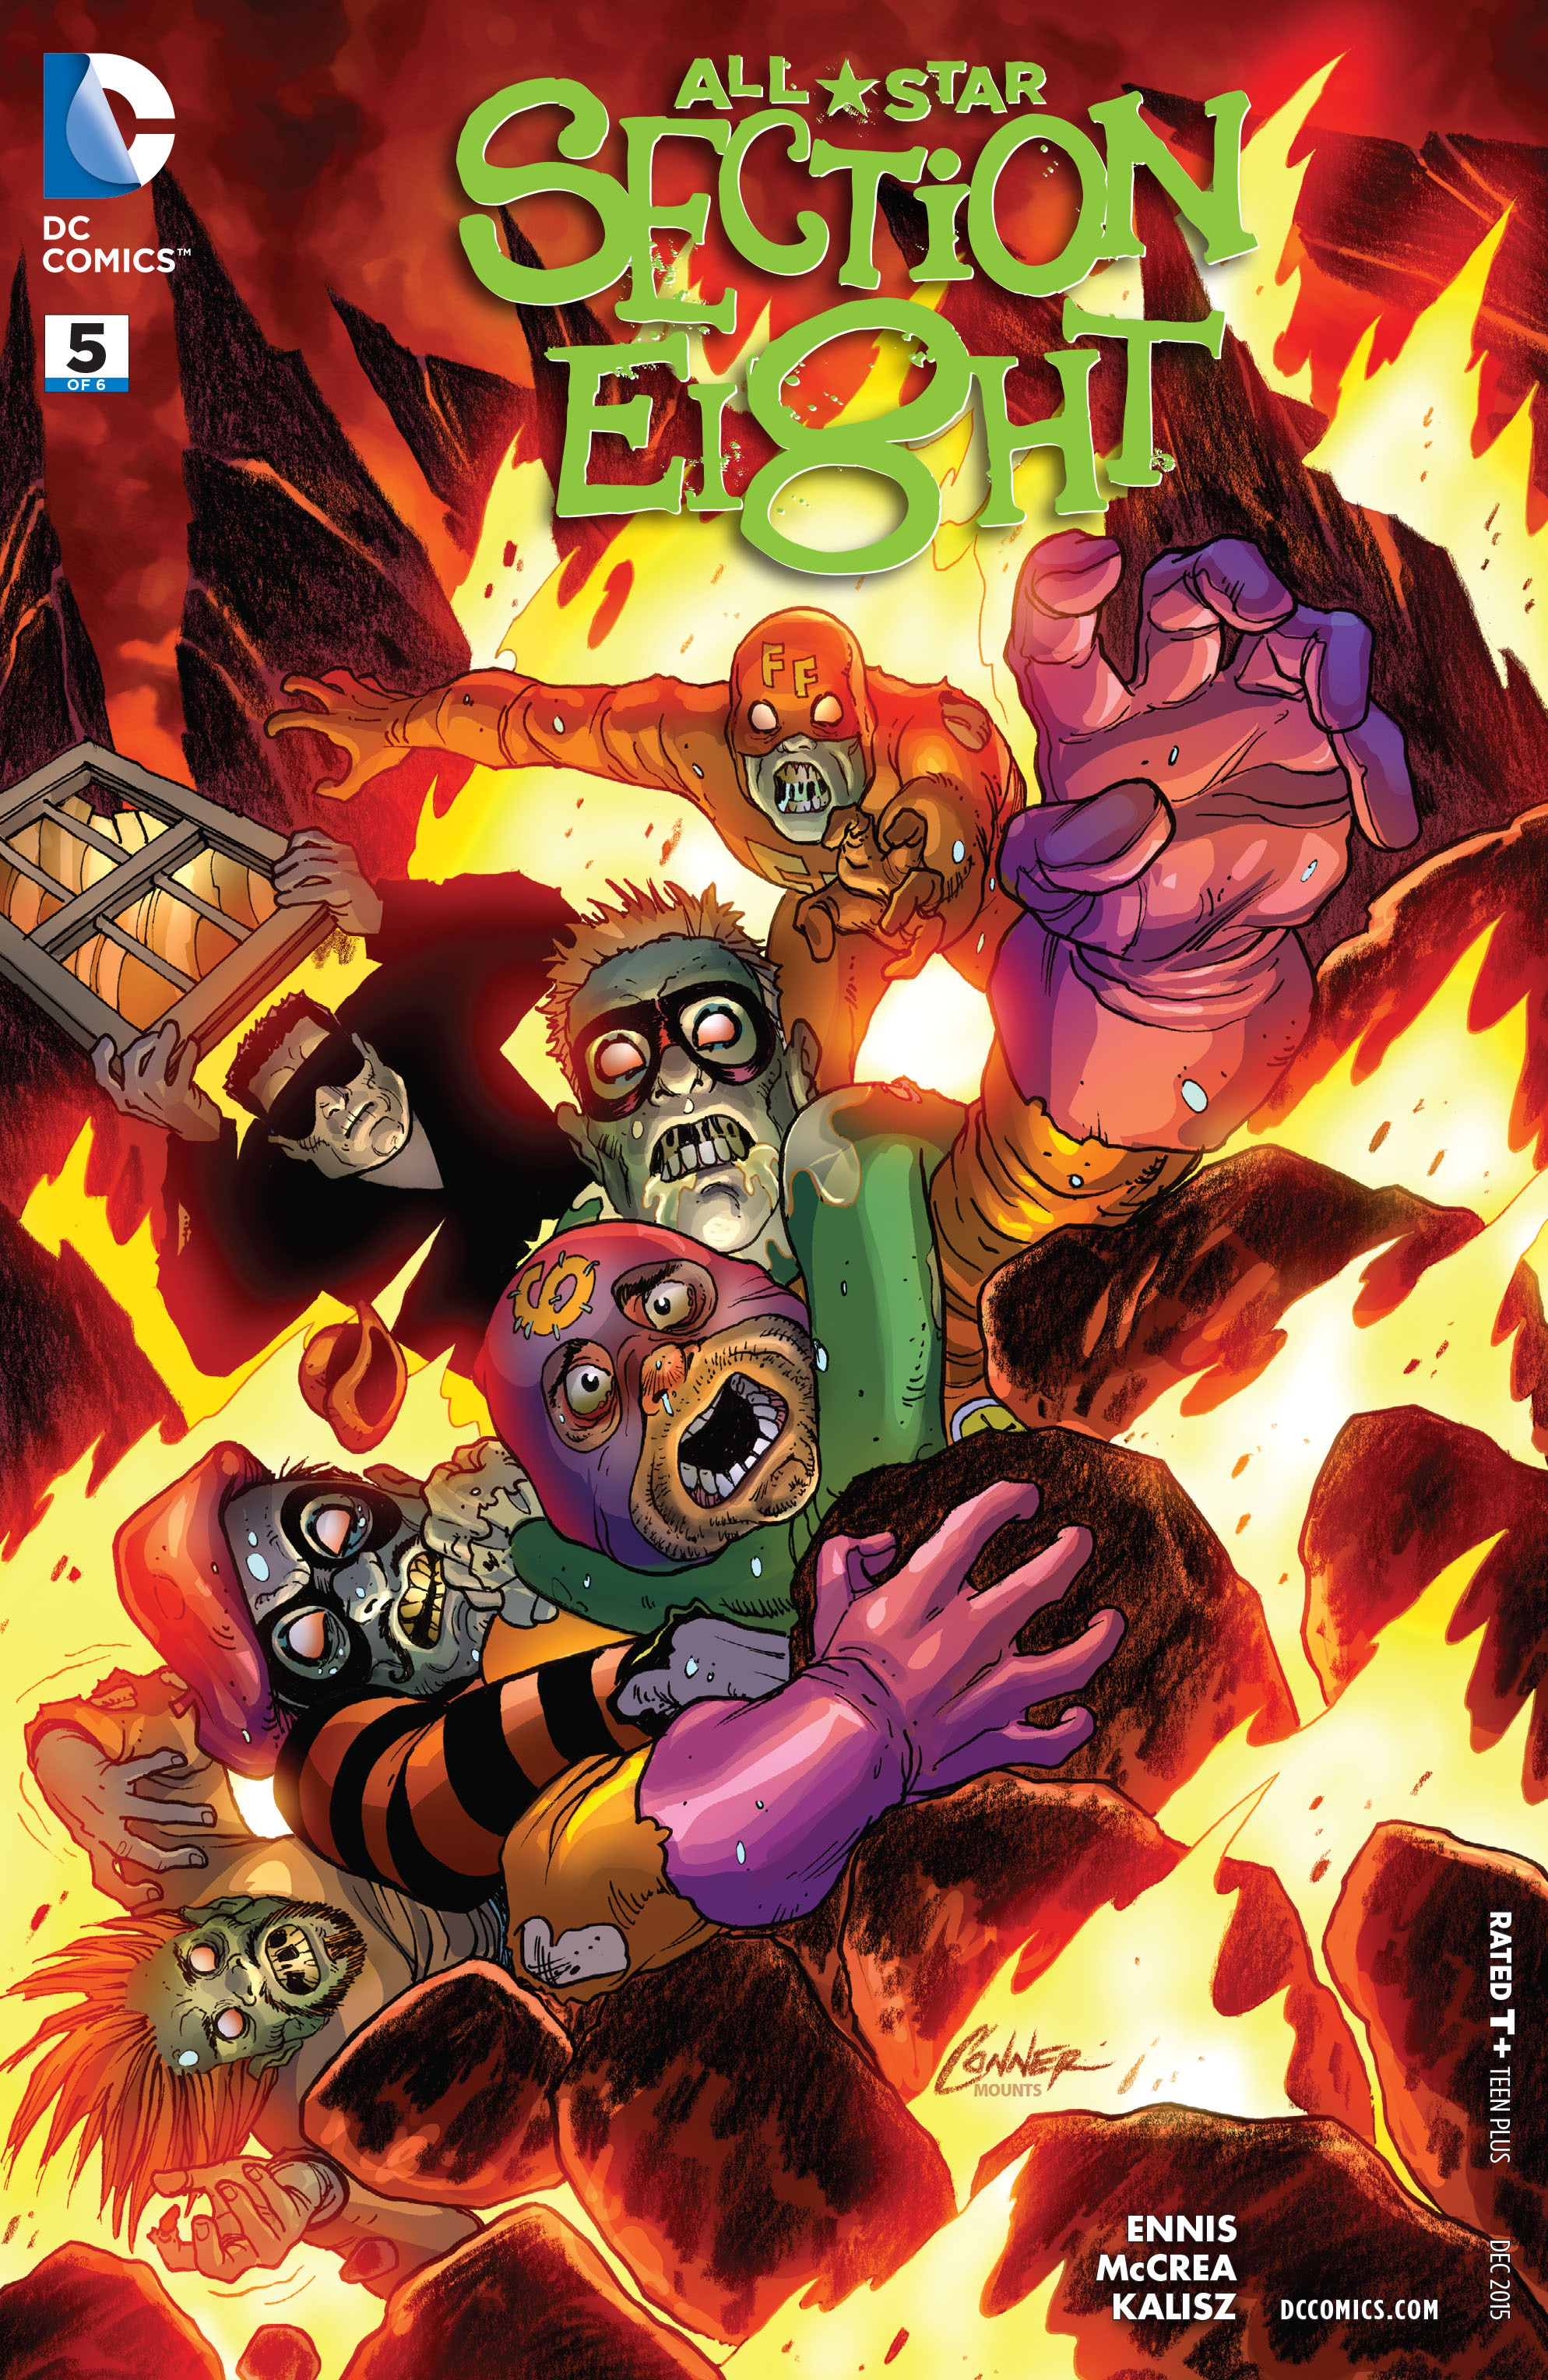 Read online All-Star Section Eight comic -  Issue #5 - 1